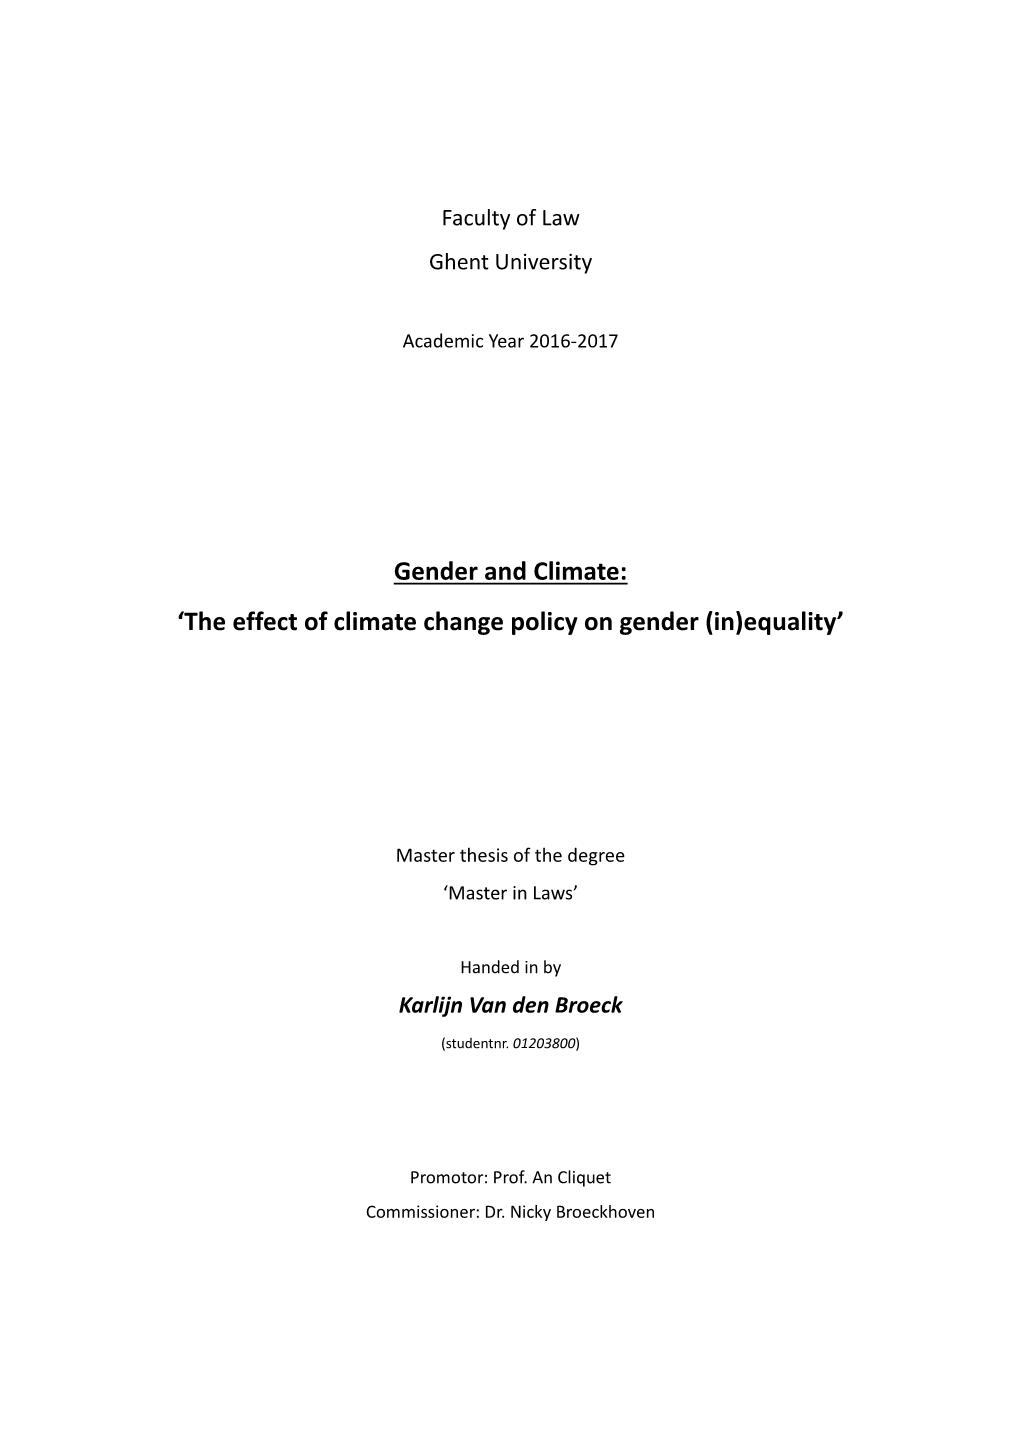 Gender and Climate: ‘The Effect of Climate Change Policy on Gender (In)Equality’